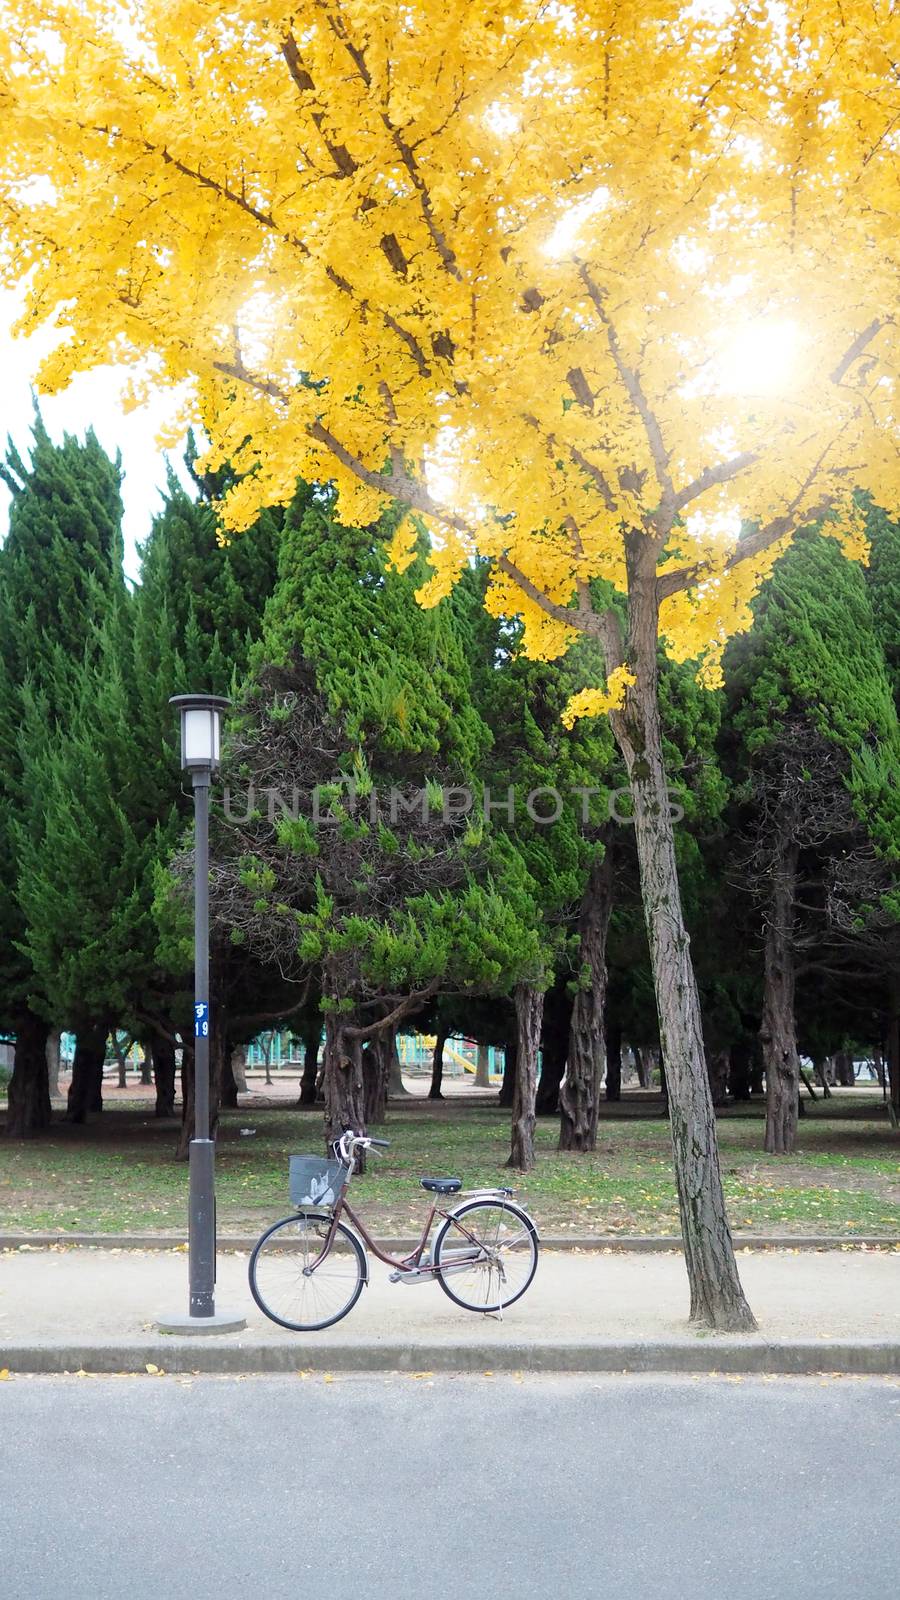 Yellow leaf tree in autumn and in the park of Osaka Japan and little old bicycle on foot path.